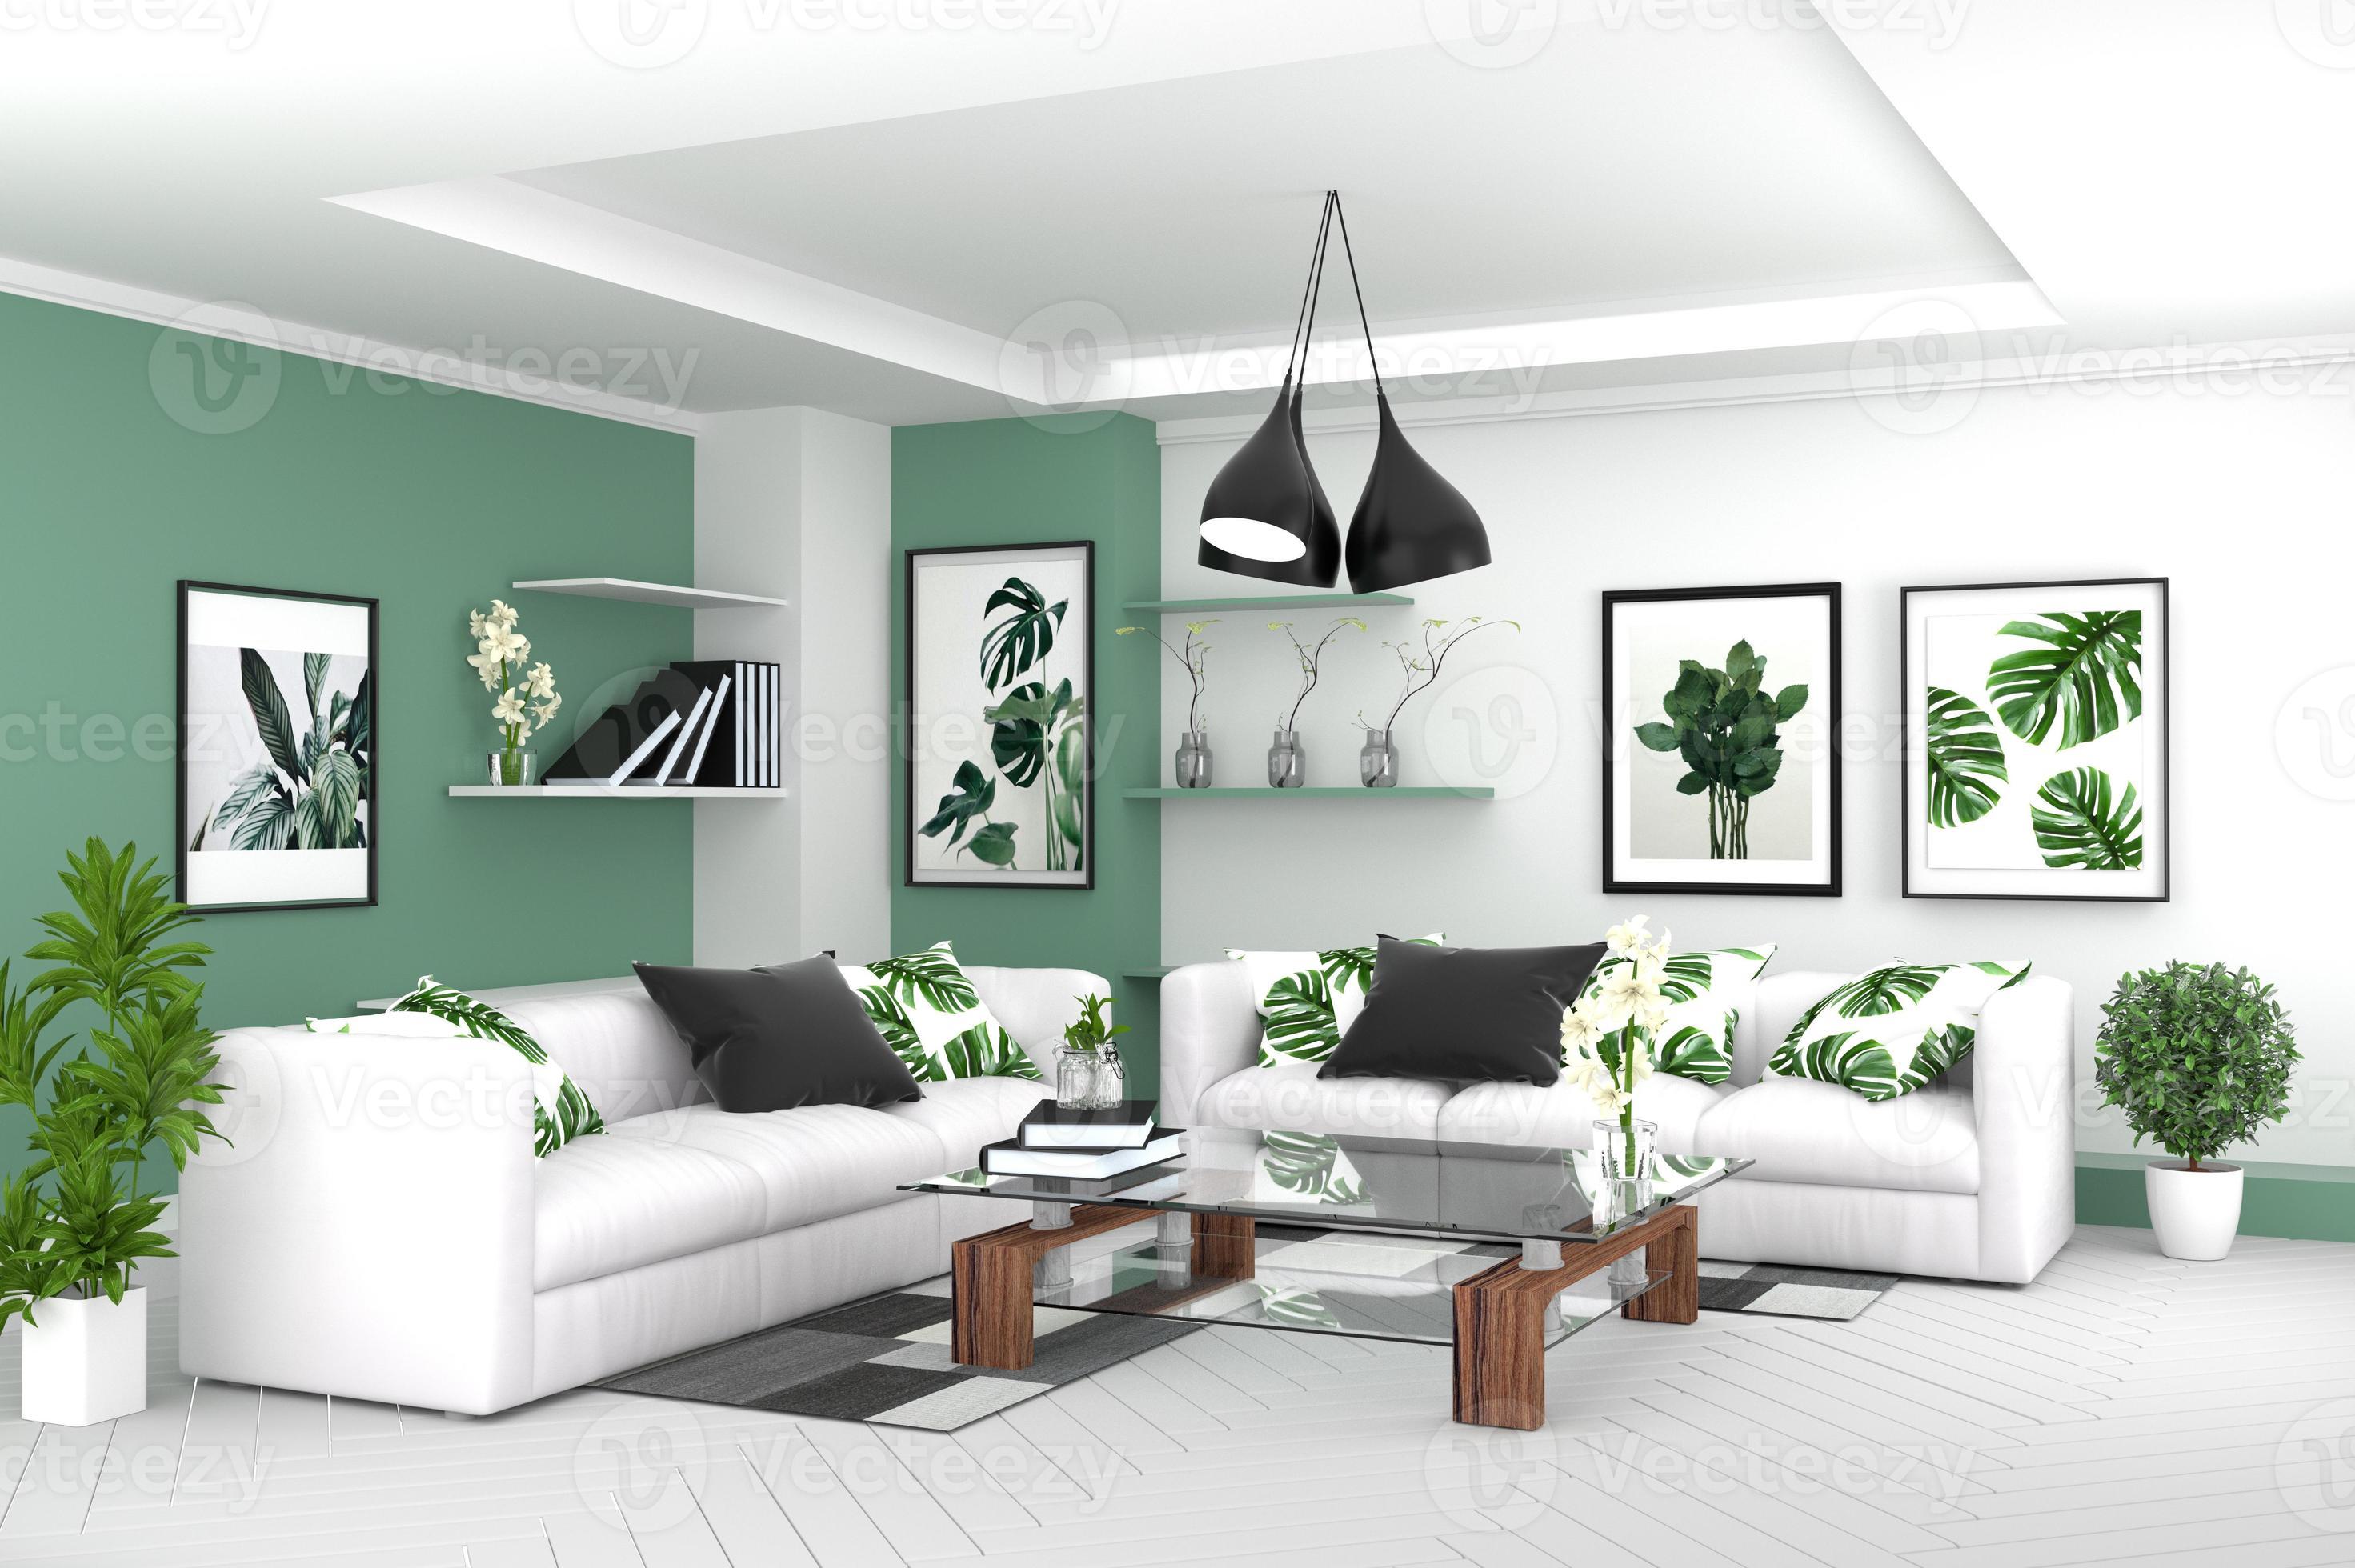 Living room interior - room modern tropical style with composition